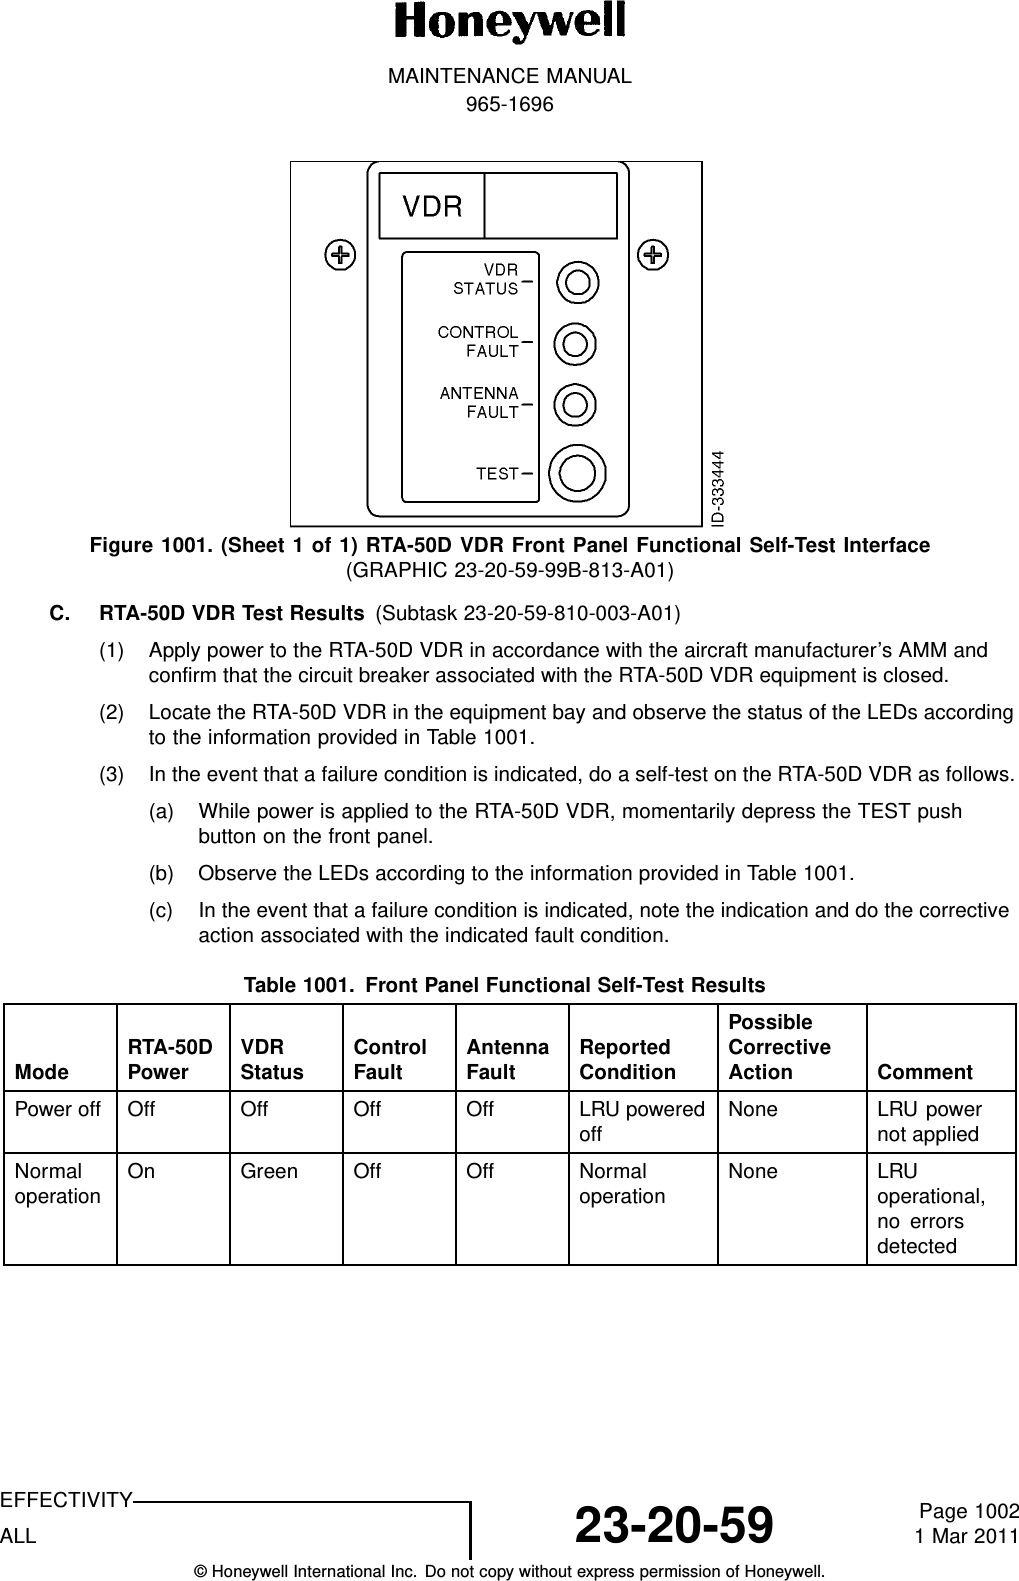 MAINTENANCE MANUAL965-1696Figure 1001. (Sheet 1 of 1) RTA-50D VDR Front Panel Functional Self-Test Interface(GRAPHIC 23-20-59-99B-813-A01)C. RTA-50D VDR Test Results (Subtask 23-20-59-810-003-A01)(1) Apply power to the RTA-50D VDR in accordance with the aircraft manufacturer’s AMM andconfirm that the circuit breaker associated with the RTA-50D VDR equipment is closed.(2) Locate the RTA-50D VDR in the equipment bay and observe the status of the LEDs accordingto the information provided in Table 1001.(3) In the event that a failure condition is indicated, do a self-test on the RTA-50D VDR as follows.(a) While power is applied to the RTA-50D VDR, momentarily depress the TEST pushbutton on the front panel.(b) Observe the LEDs according to the information provided in Table 1001.(c) In the event that a failure condition is indicated, note the indication and do the correctiveaction associated with the indicated fault condition.Table 1001. Front Panel Functional Self-Test ResultsMode RTA-50DPower VDRStatus ControlFault AntennaFault ReportedConditionPossibleCorrectiveAction CommentPower off Off Off Off Off LRU poweredoff None LRU powernot appliedNormaloperation On Green Off Off Normaloperation None LRUoperational,no errorsdetectedEFFECTIVITYALL 23-20-59 Page 10021 Mar 2011© Honeywell International Inc. Do not copy without express permission of Honeywell.